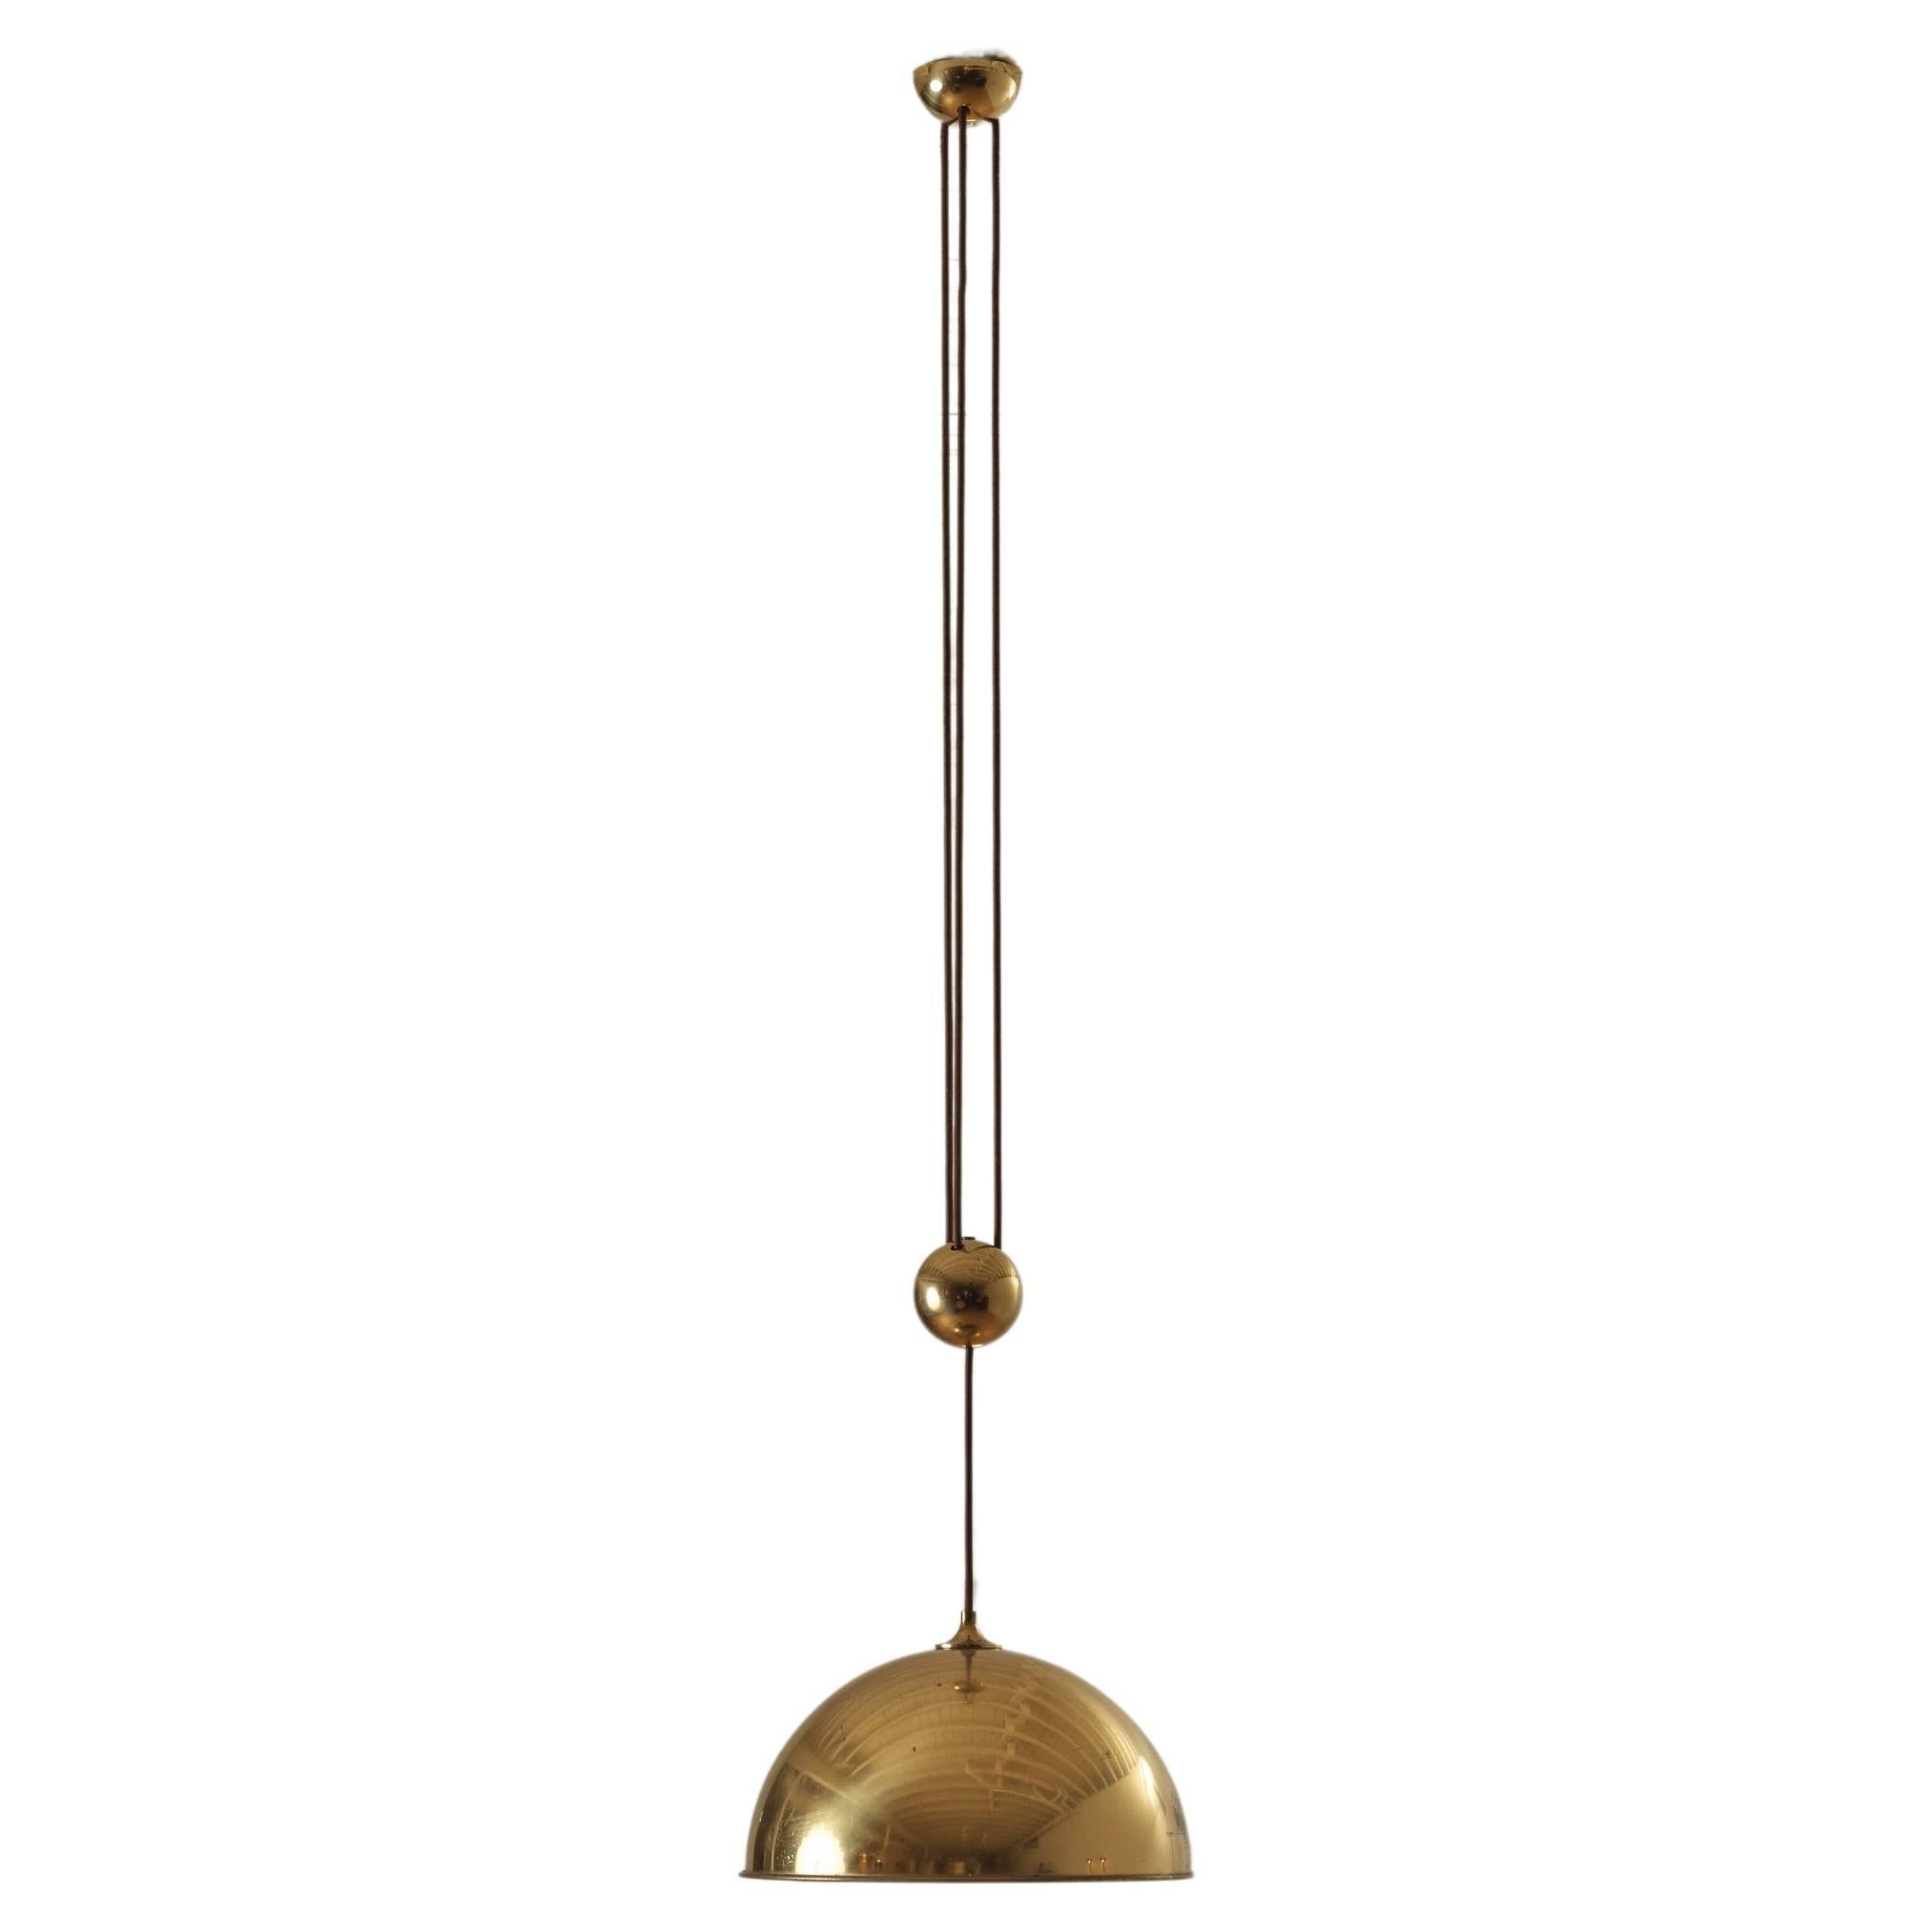 'Duos 36' Counter Balance Pendant by Florian Schulz For Sale